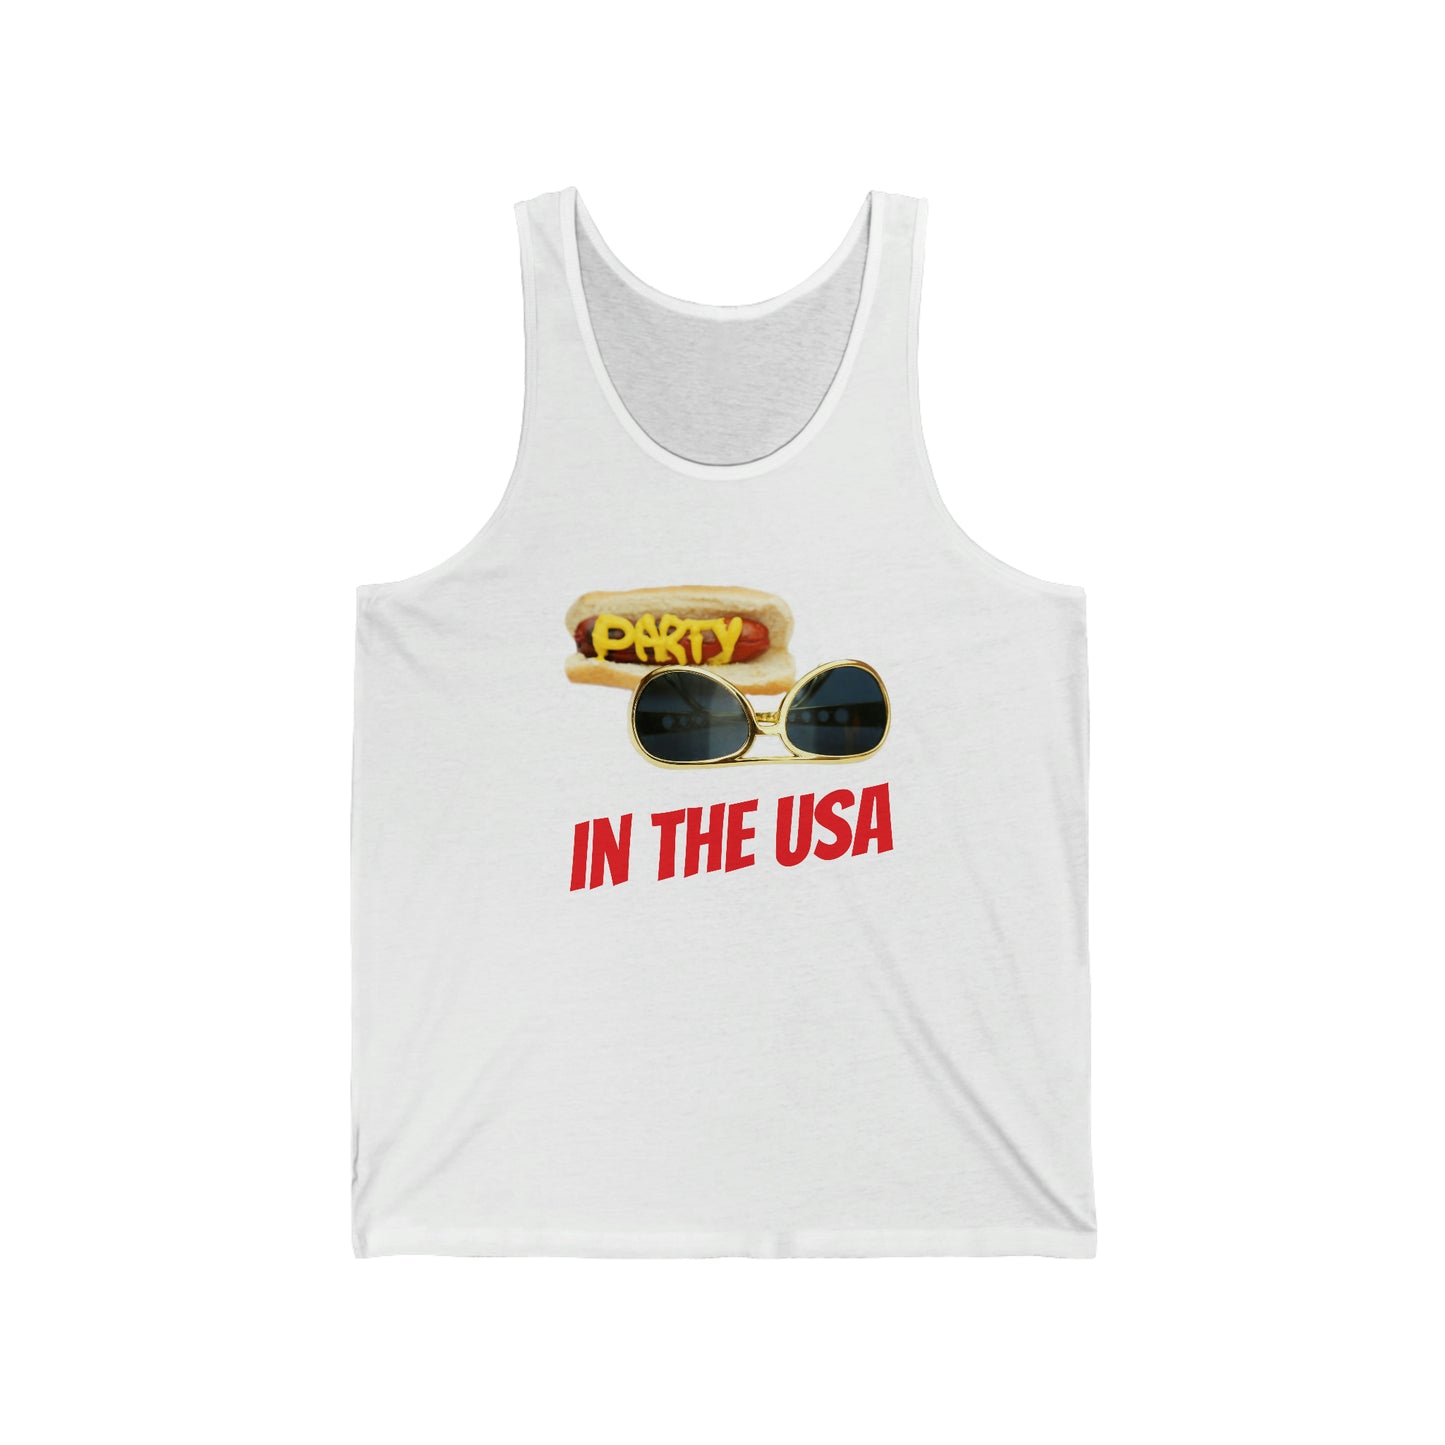 Party in the USA Men's Tank